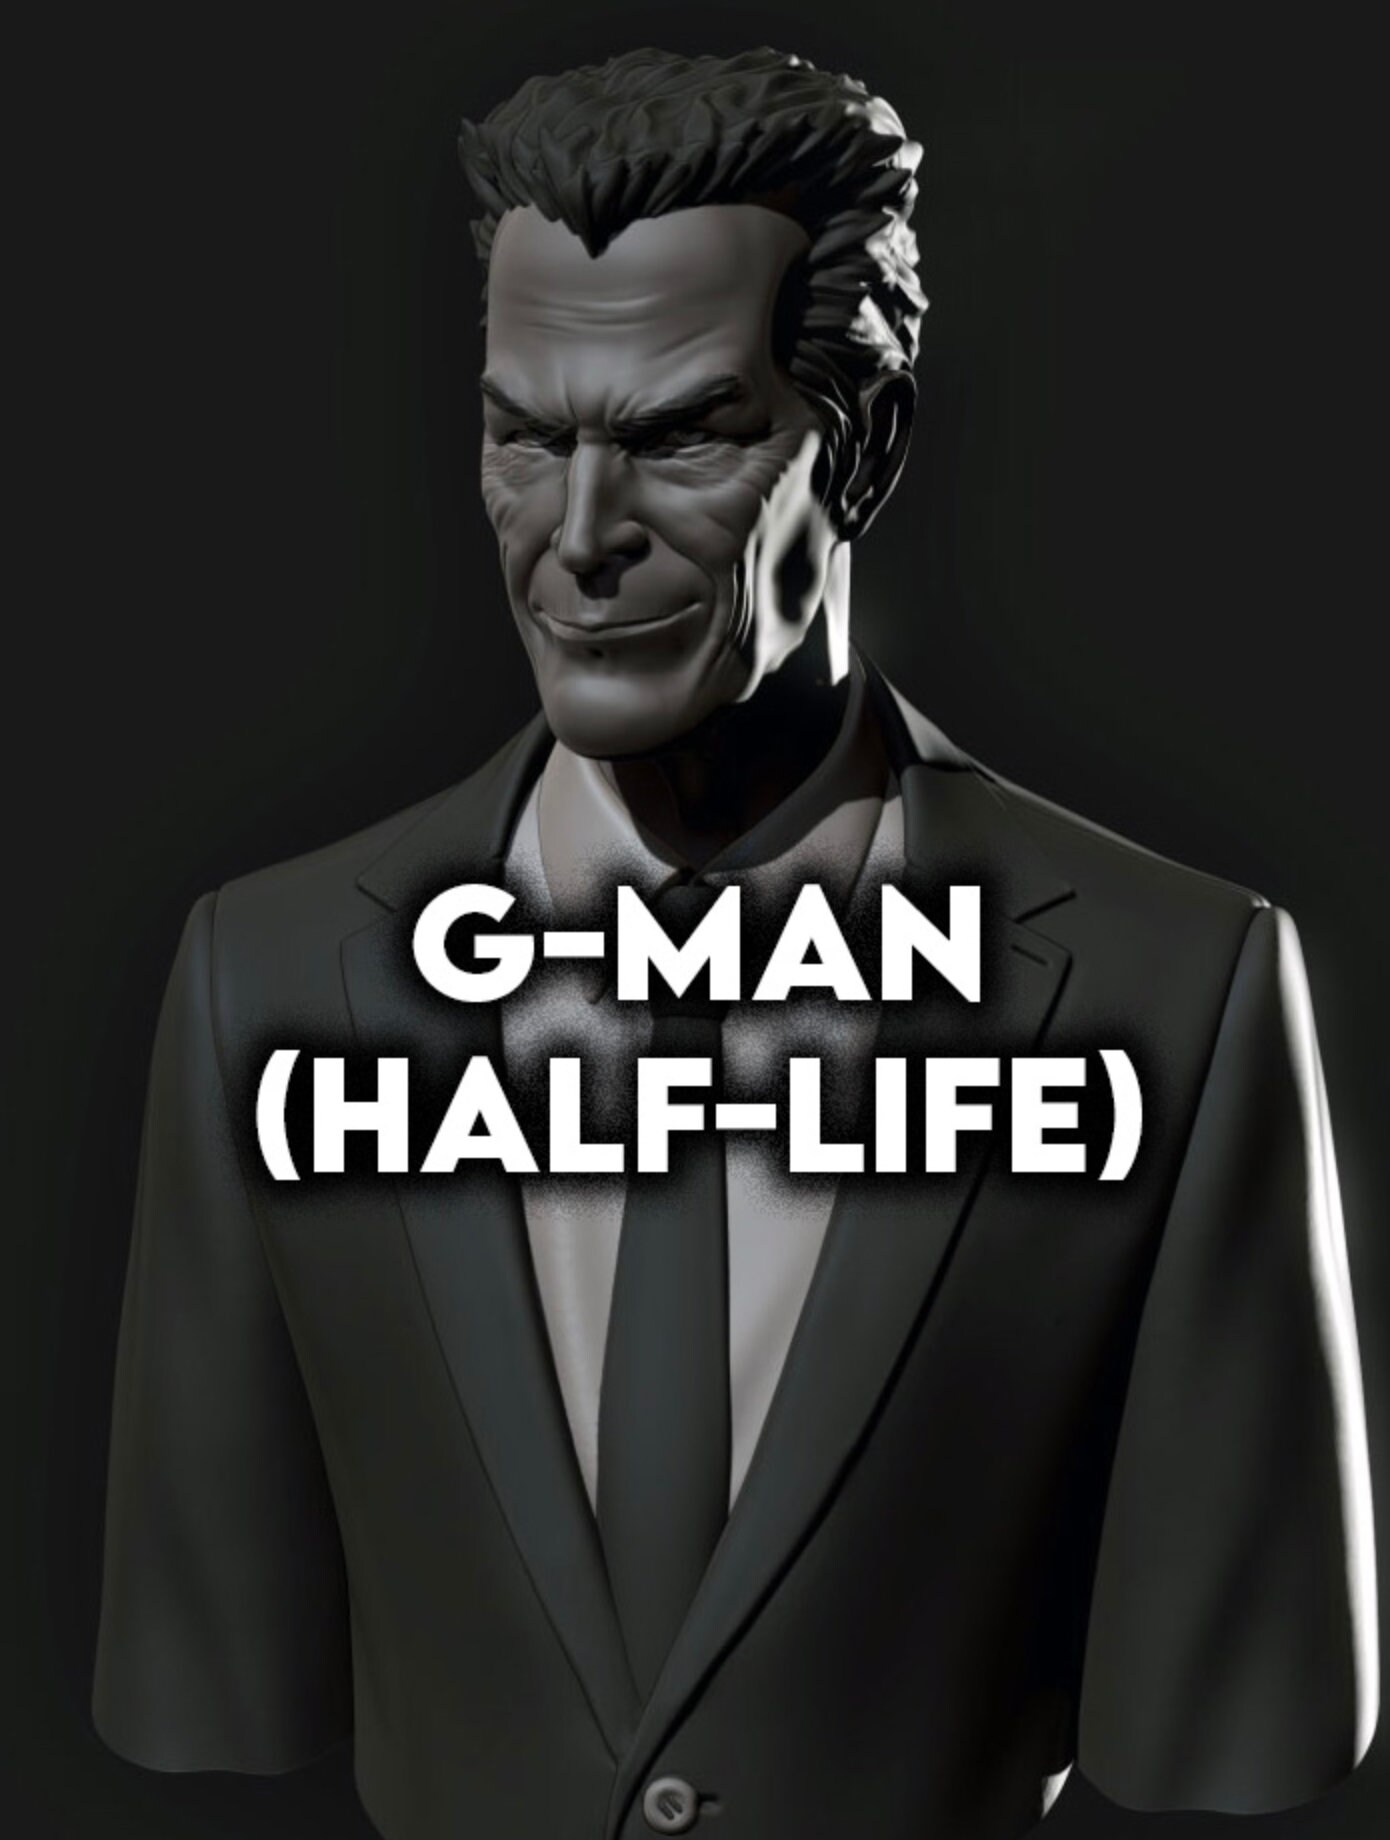 Half Life Gman Statue Bust Figure Collectable 